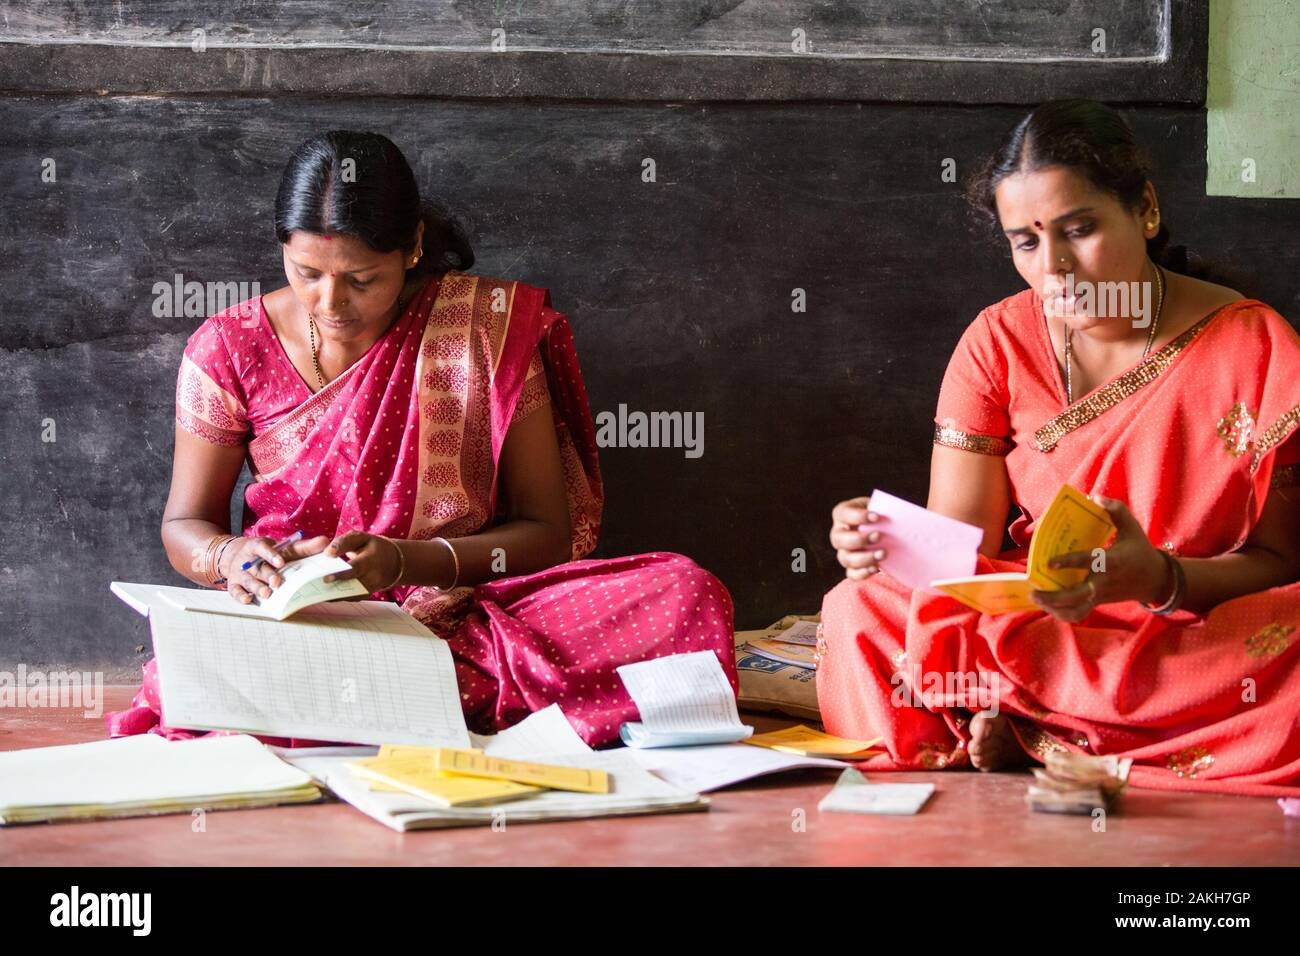 CAPTION: Every self-help group (SHG) has various office-bearing positions, including chairperson (right) and treasurer (left). LOCATION: Doddarayapete Stock Photo